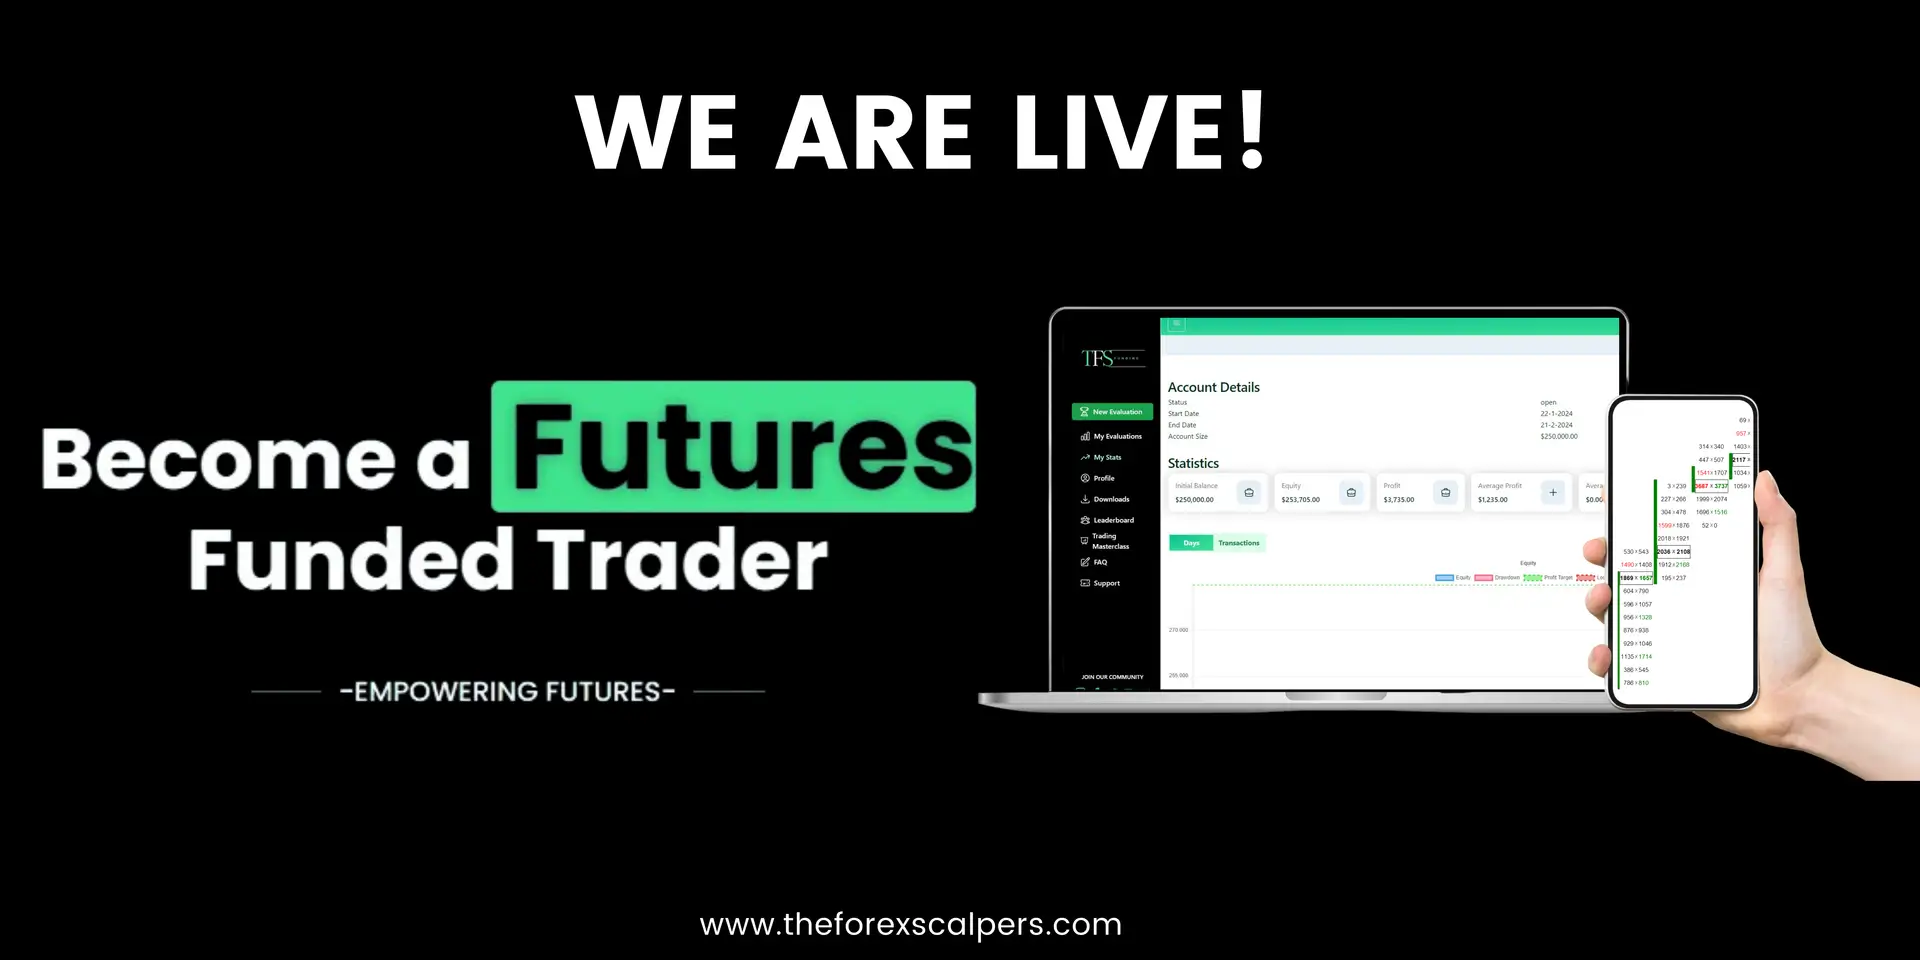 Why trading futures?